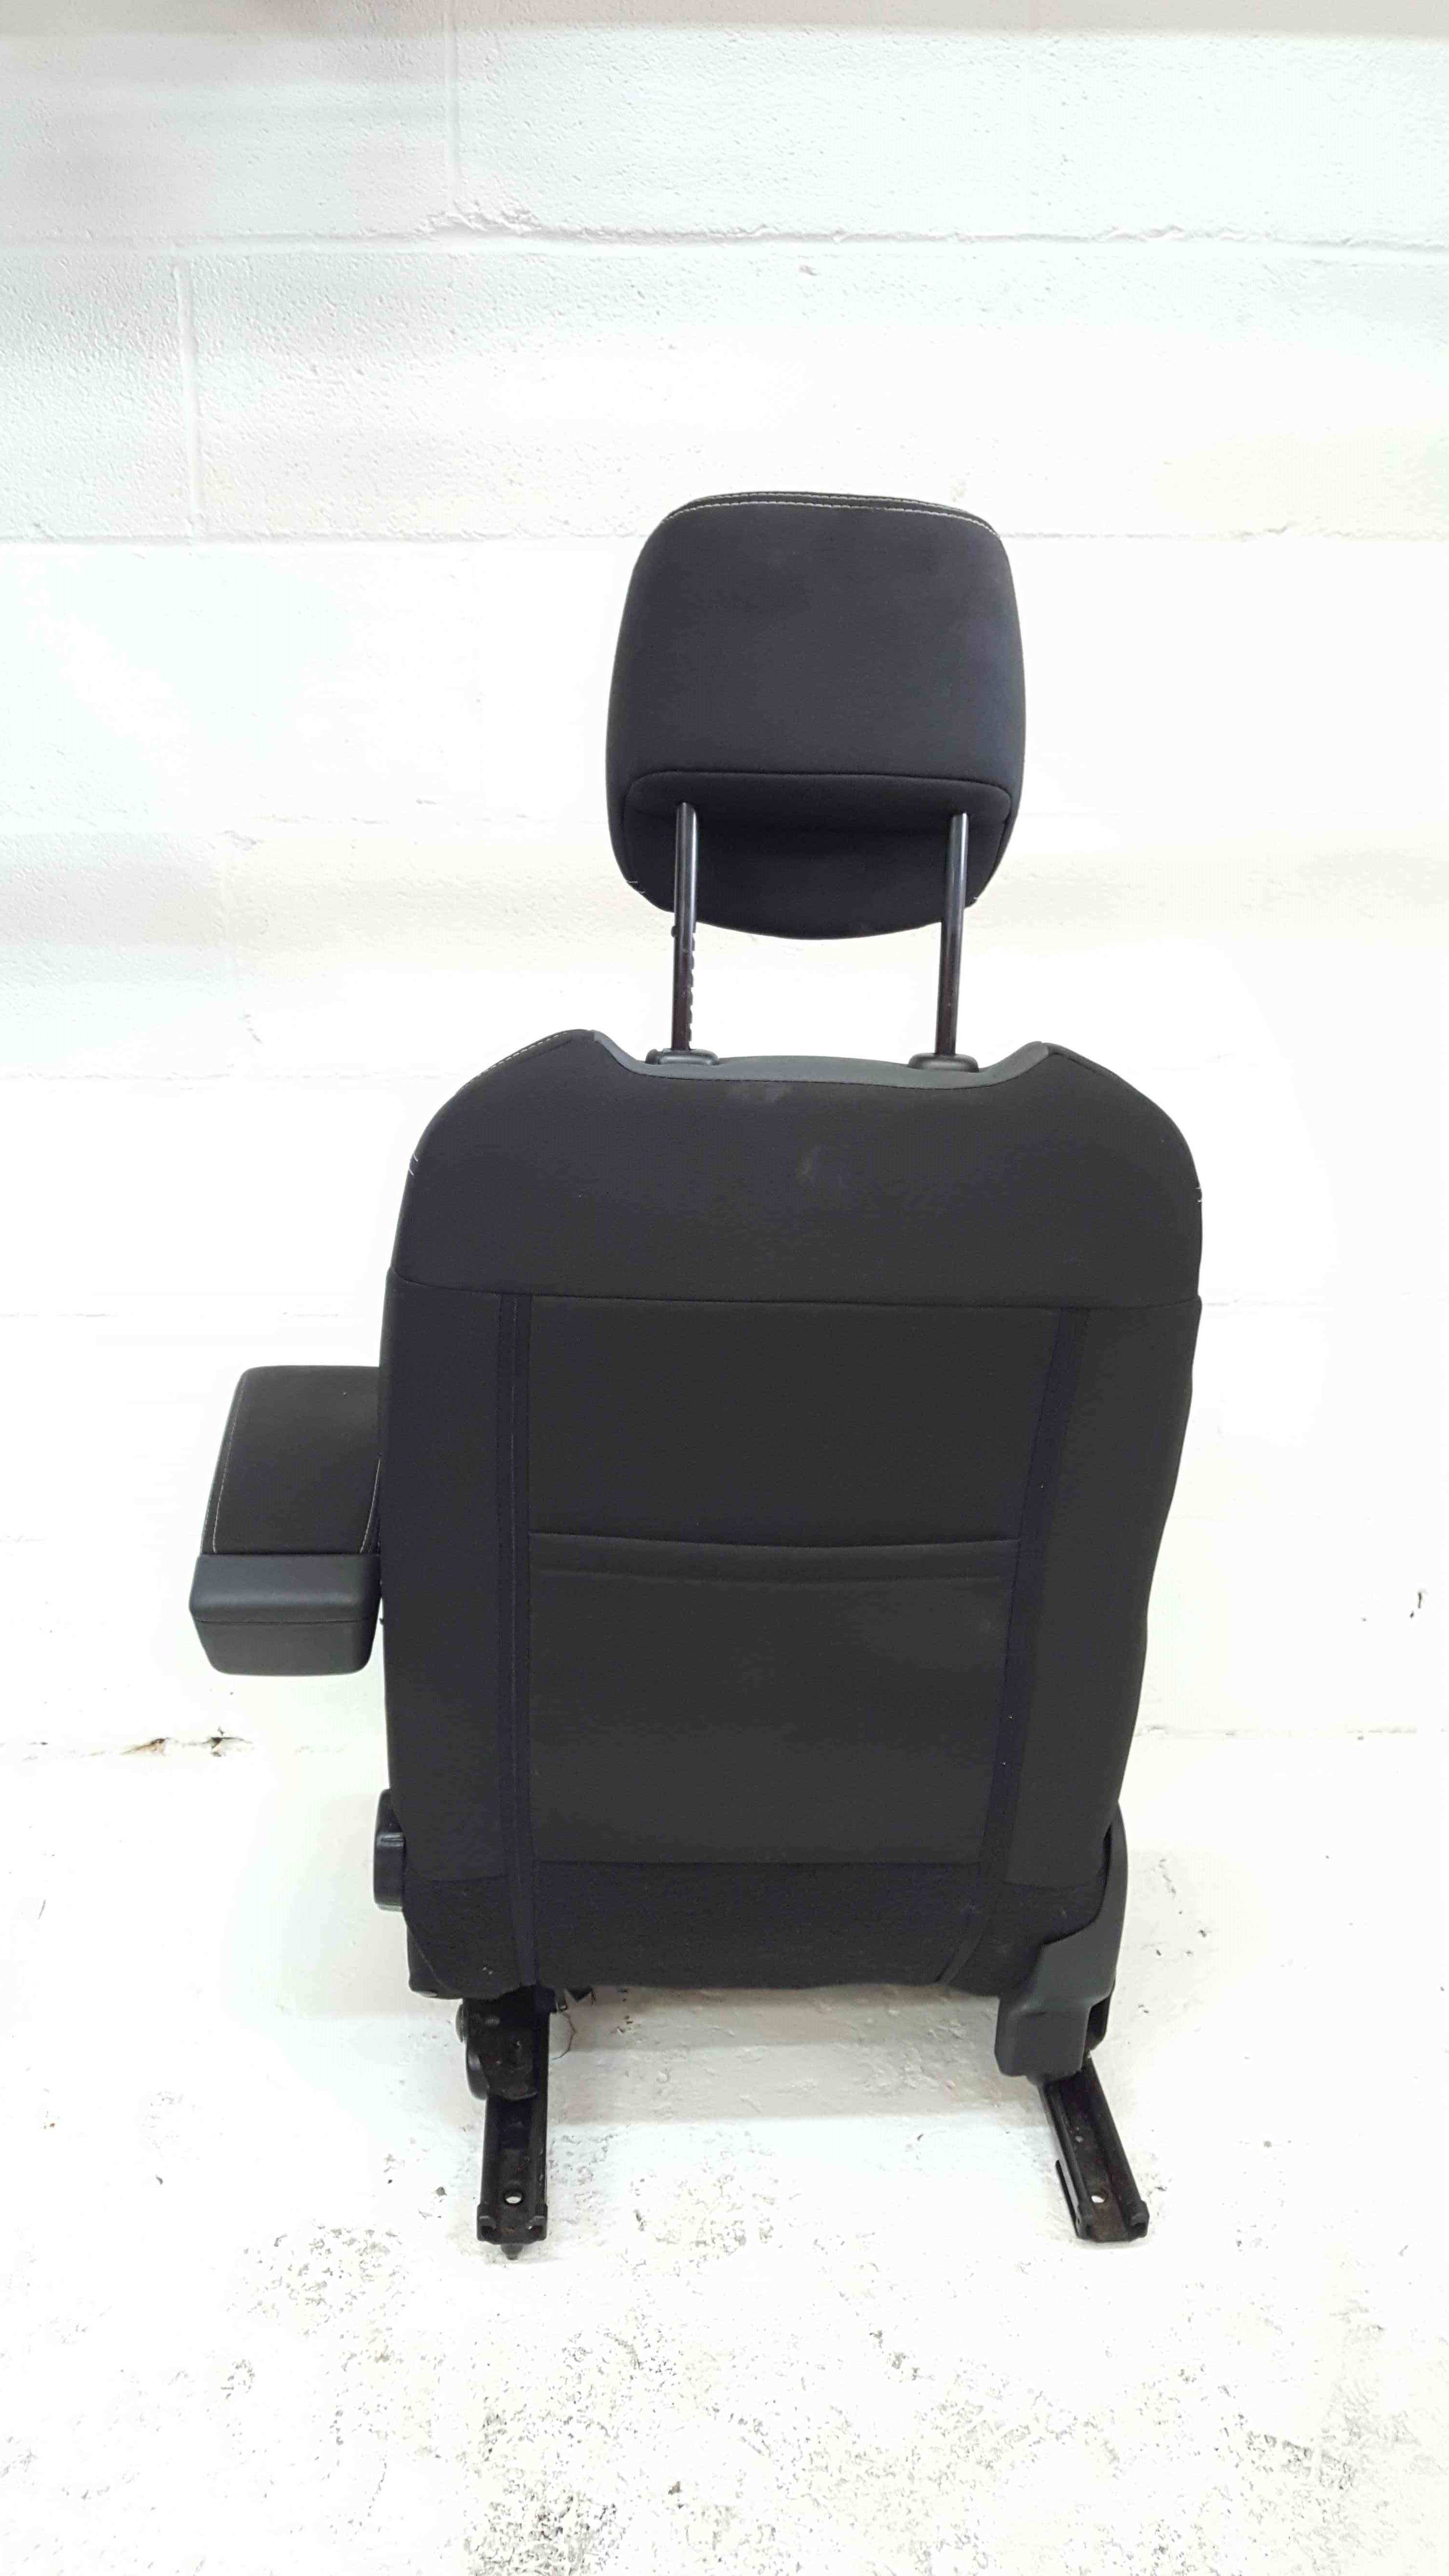 Renault Clio MK4 2013-2016 Drivers OSF Front Seat Chair Black + ARM Rest